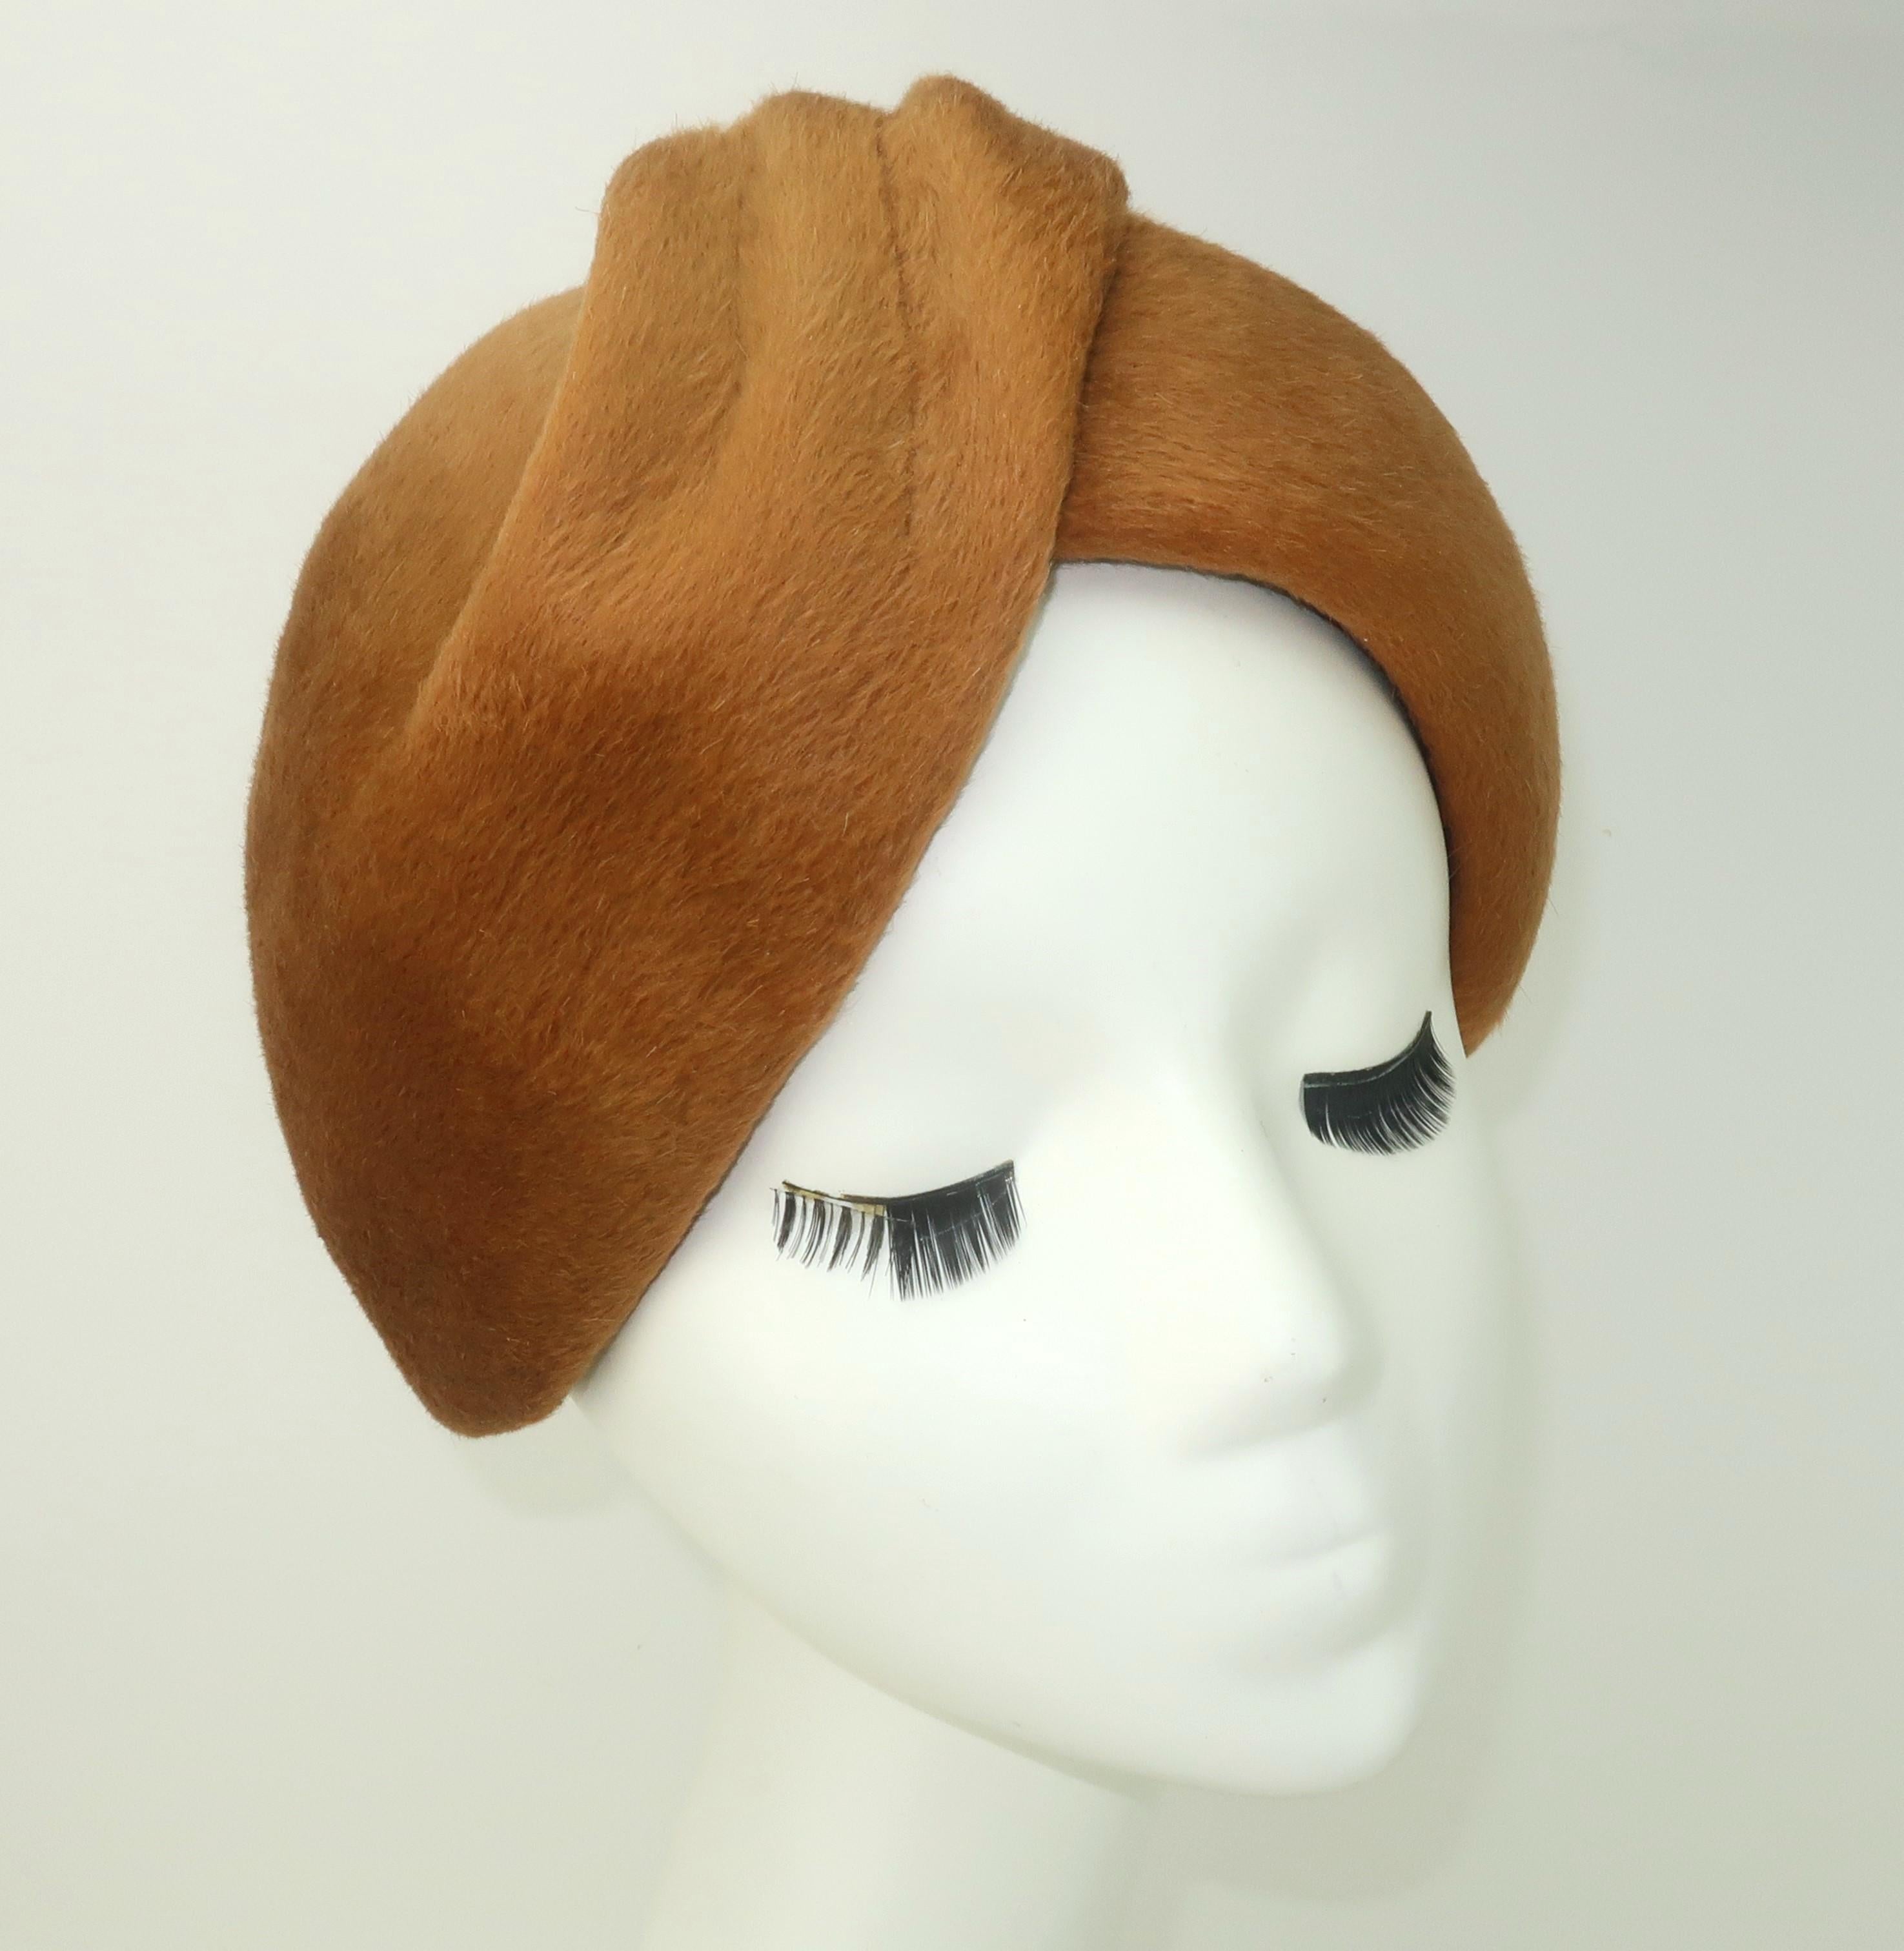 Faboo!  1960's Jean Patou fur felt hat with a turban silhouette in a yummy caramel brown color.  The hat appears to be an effortless twist of fabric with a ruched design at the front finishing to two tails at the back.  The felt appears to be